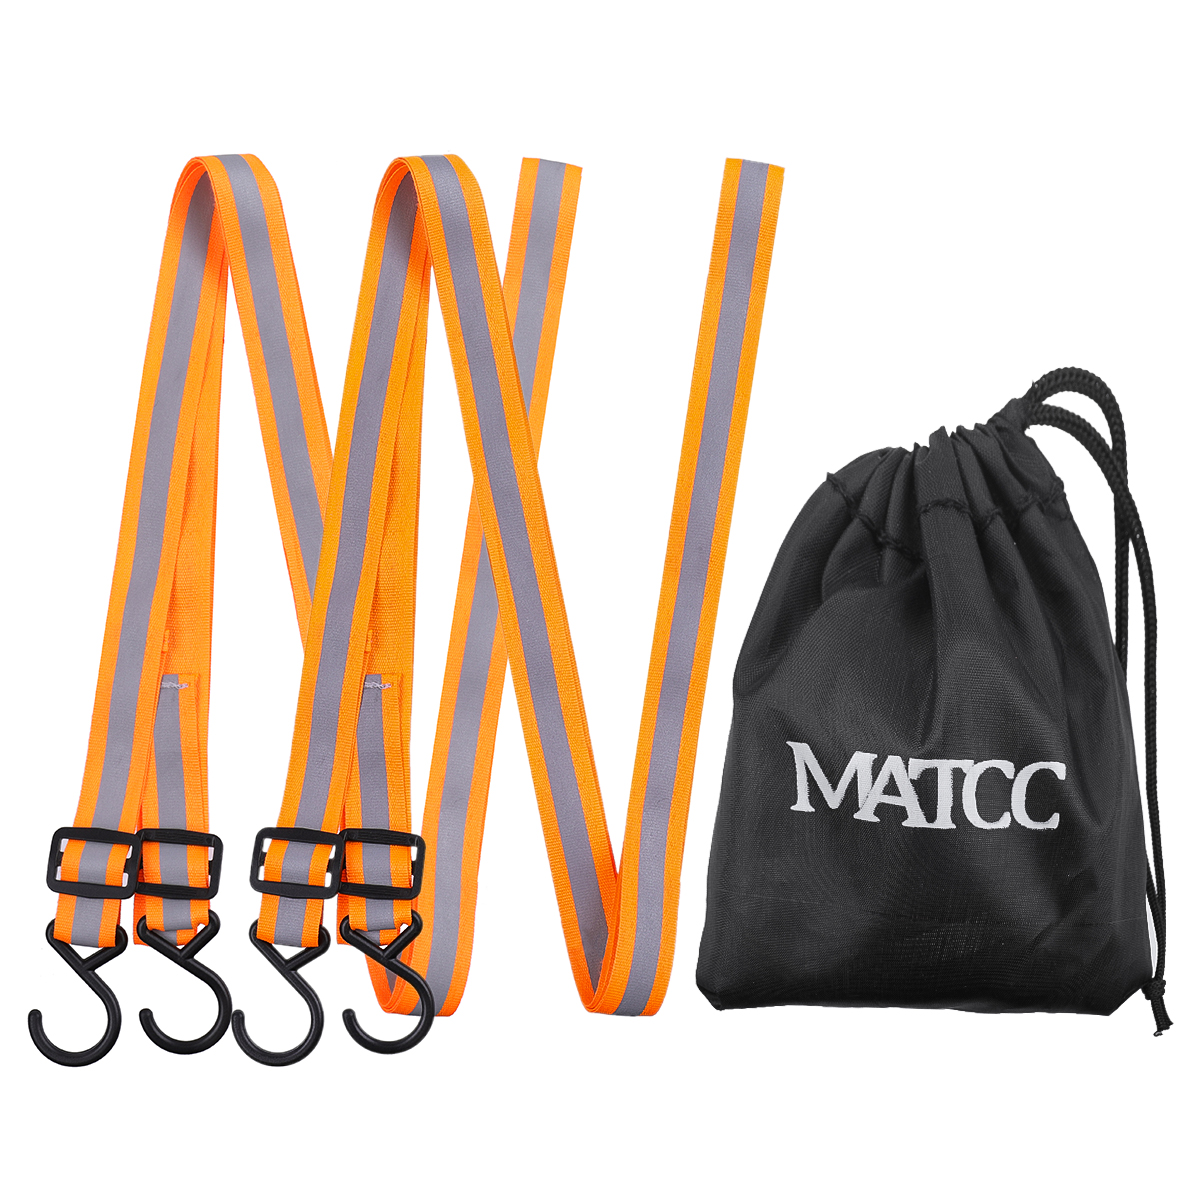 MATCC 2PCS 400CM Windbreak Belts Front Rear Gust Strap for Vehicle Cover Protection Outdoor